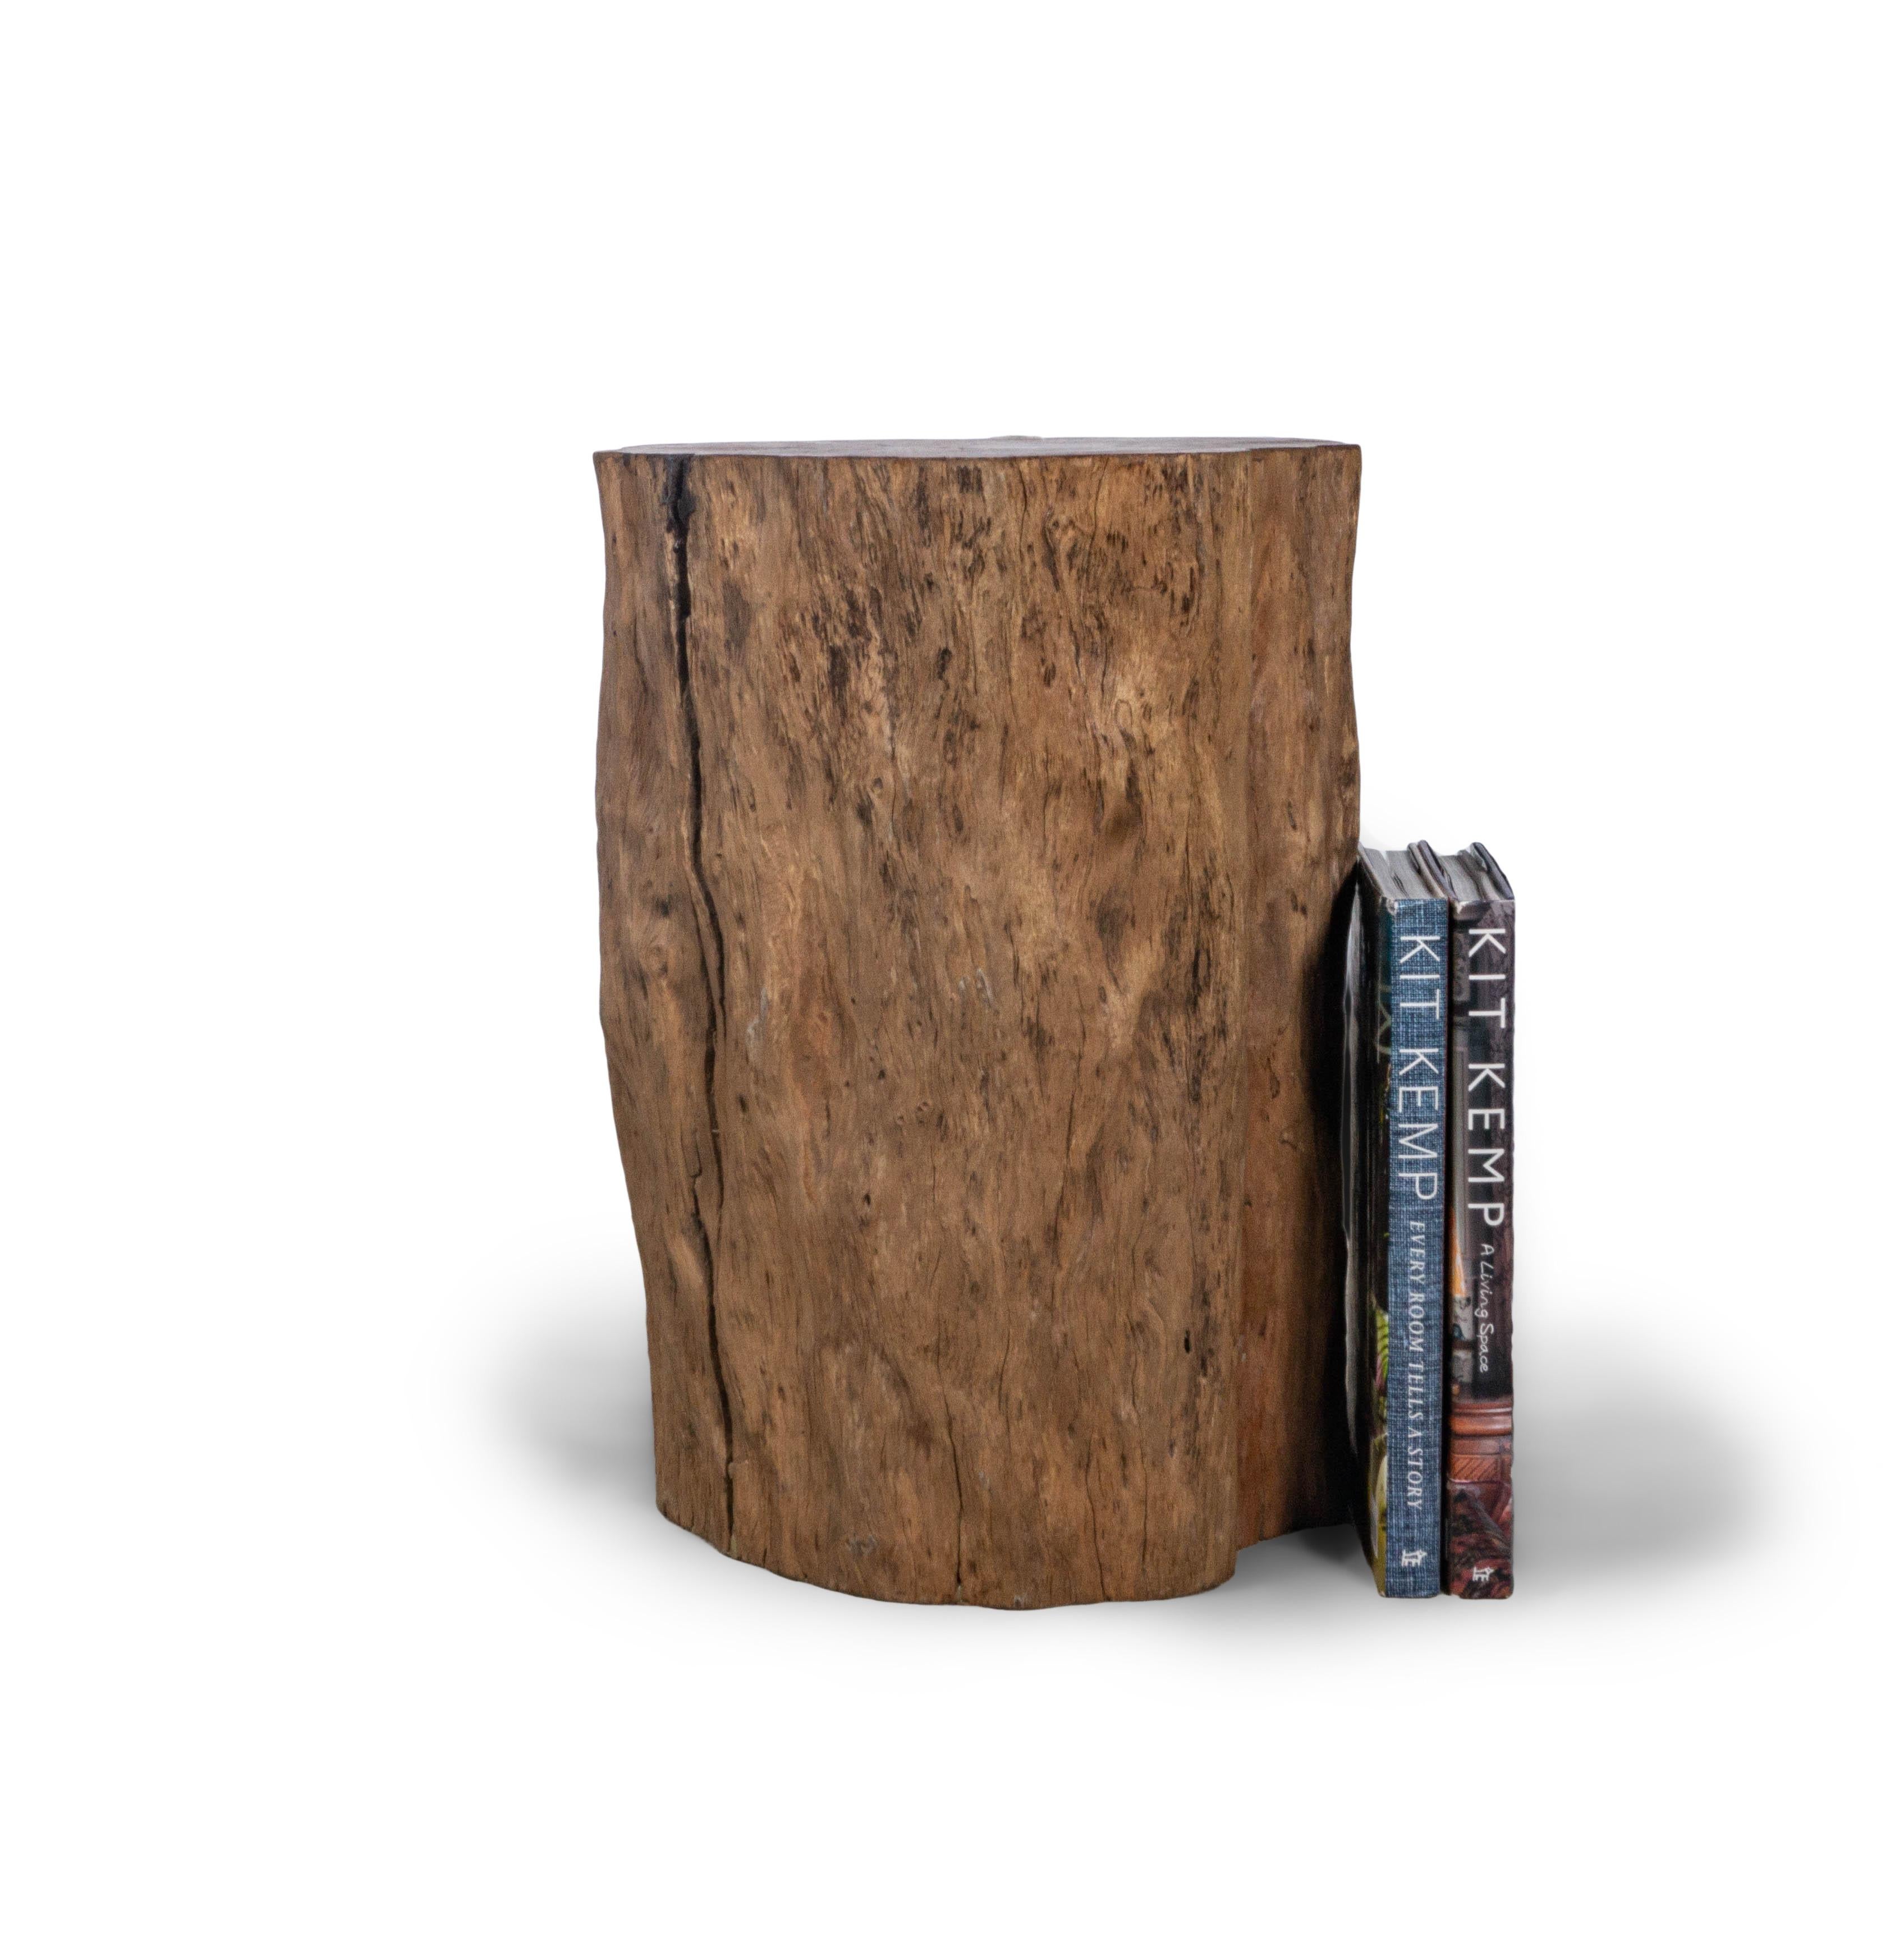 This organic form lychee wood side table offers a one of a kind shape found only in nature making it the perfect way to bring the outdoors in. Offering a beautiful cider toned hue, this lychee wood side table is also a great way to ad warmth into